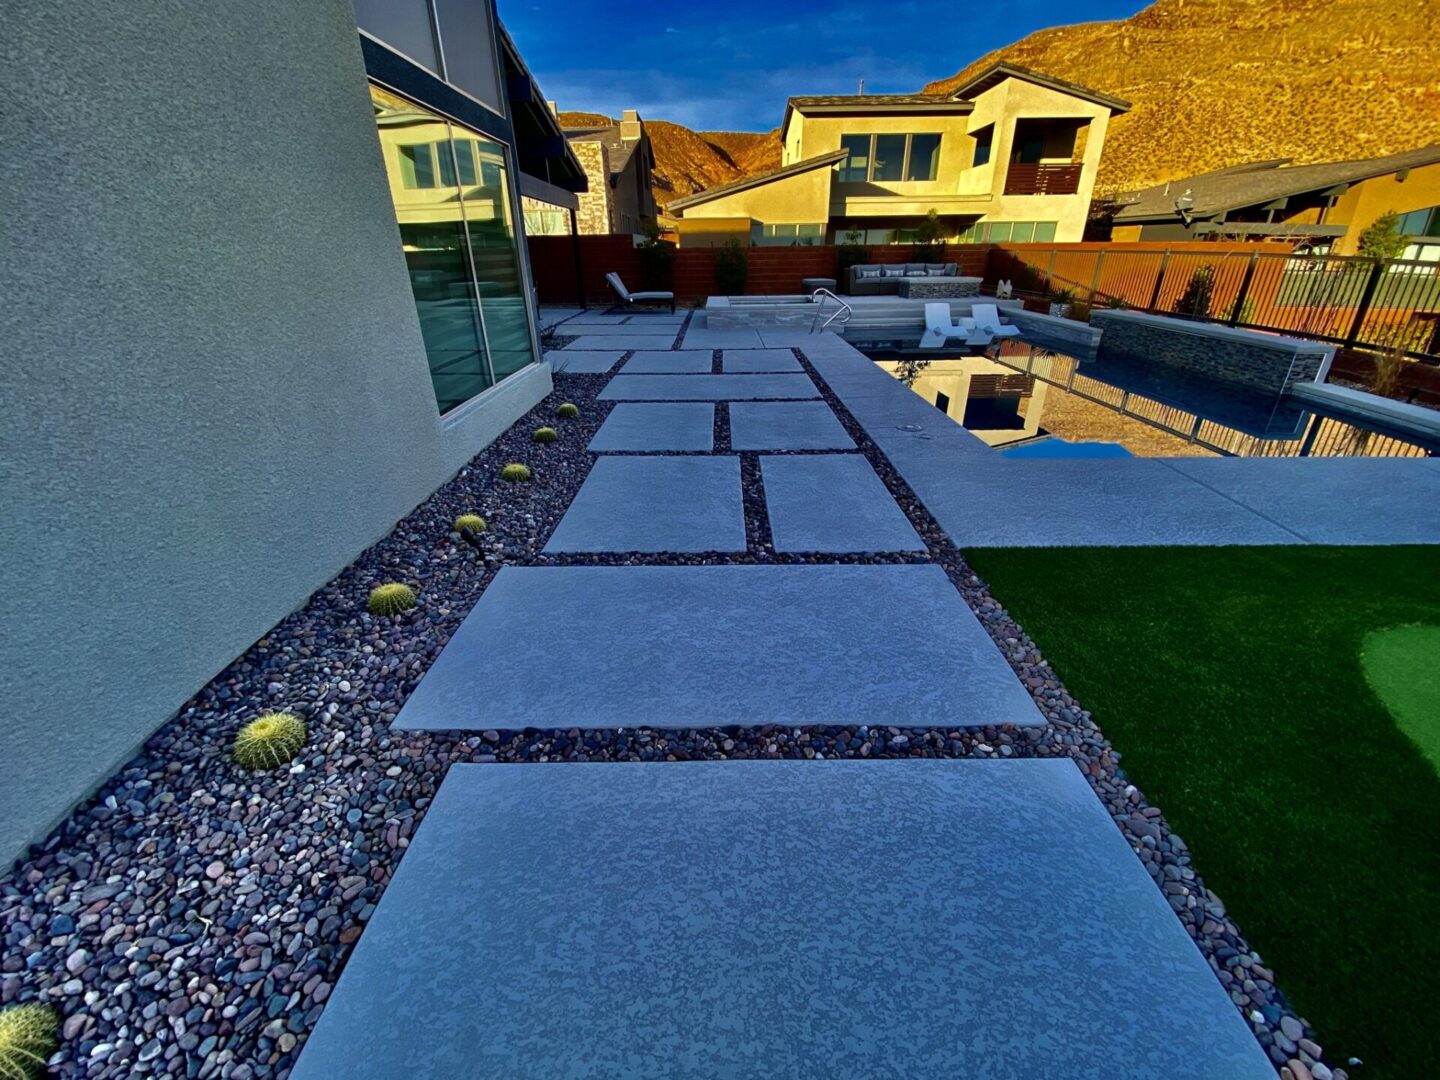 A view of a backyard with grass and concrete.